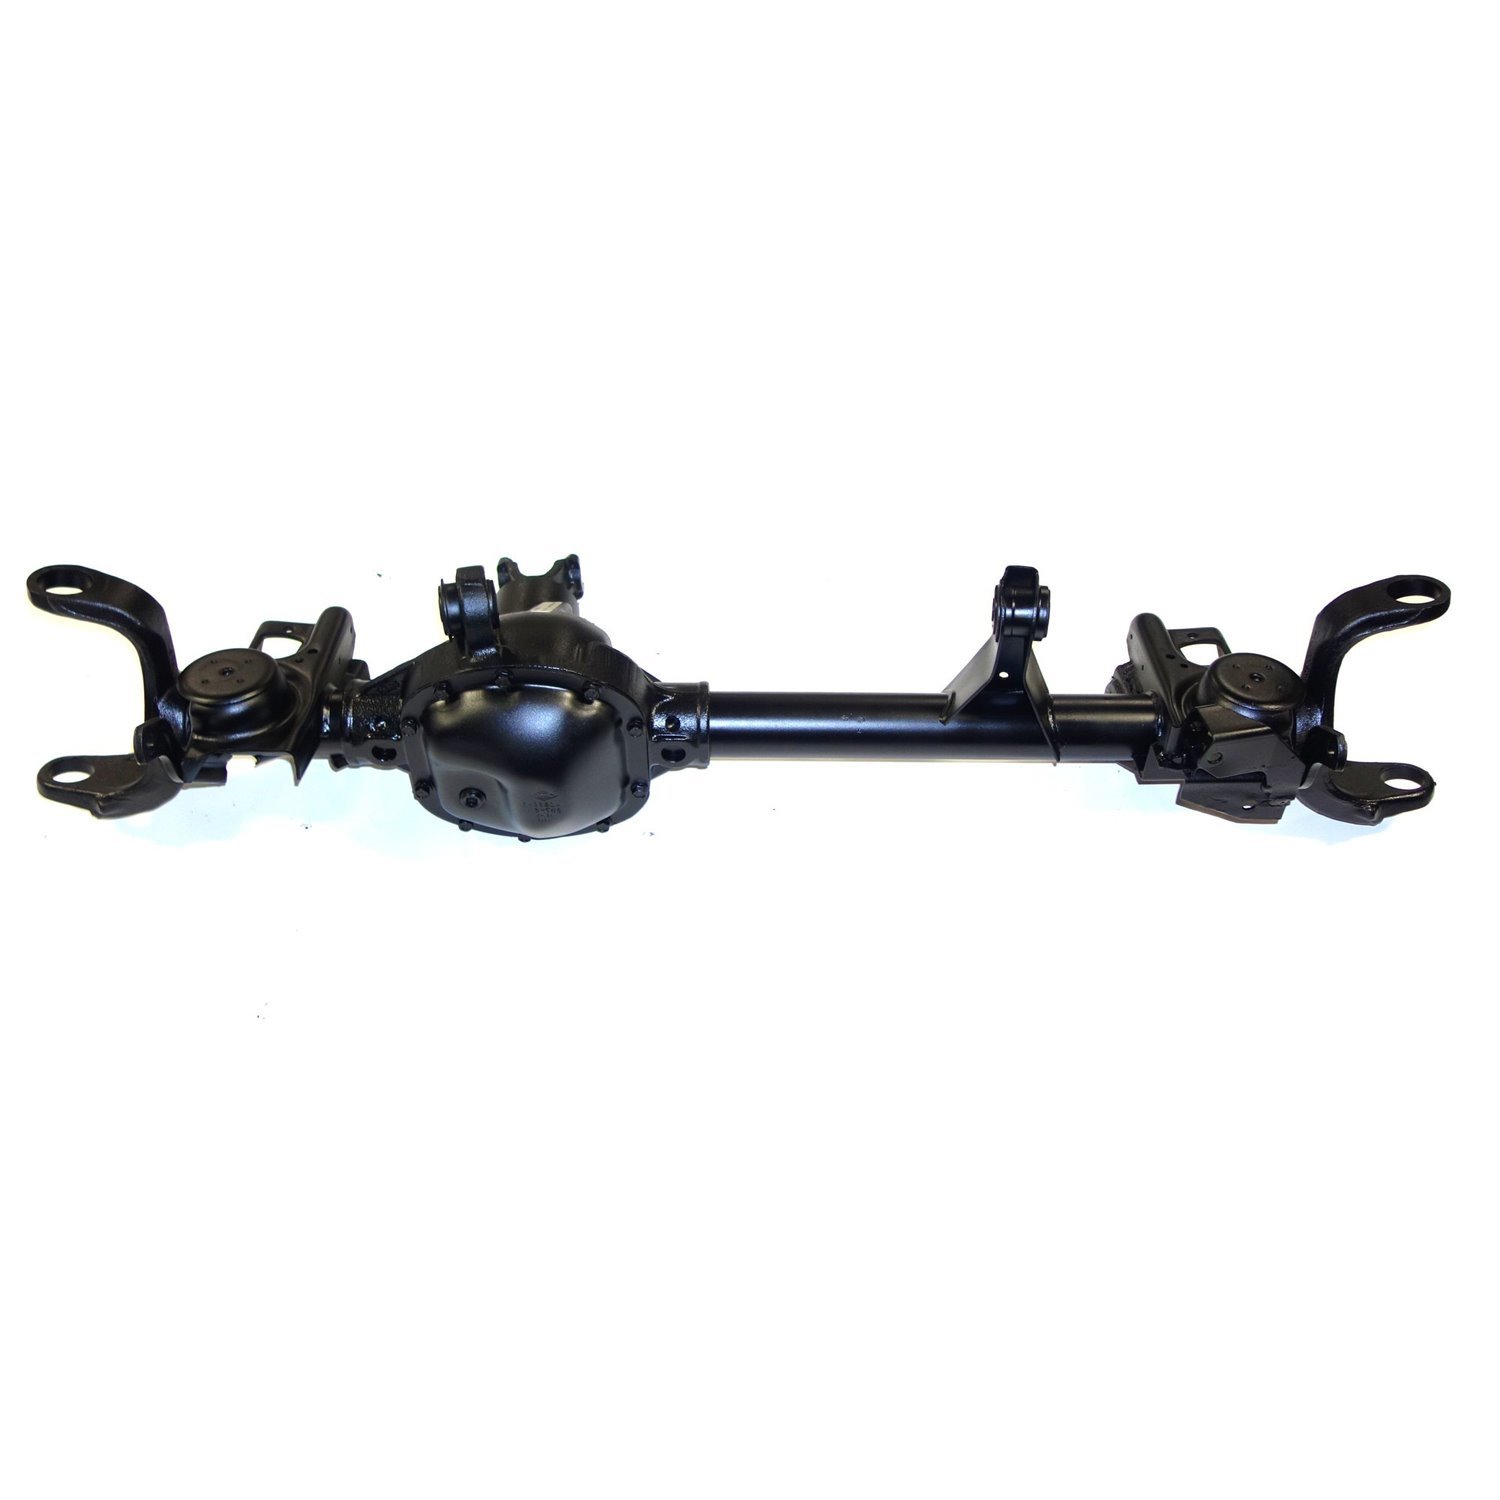 Remanufactured Complete Axle Assembly for Dana 30 09-10 Jeep Wrangler 3.73 Ratio with ABS